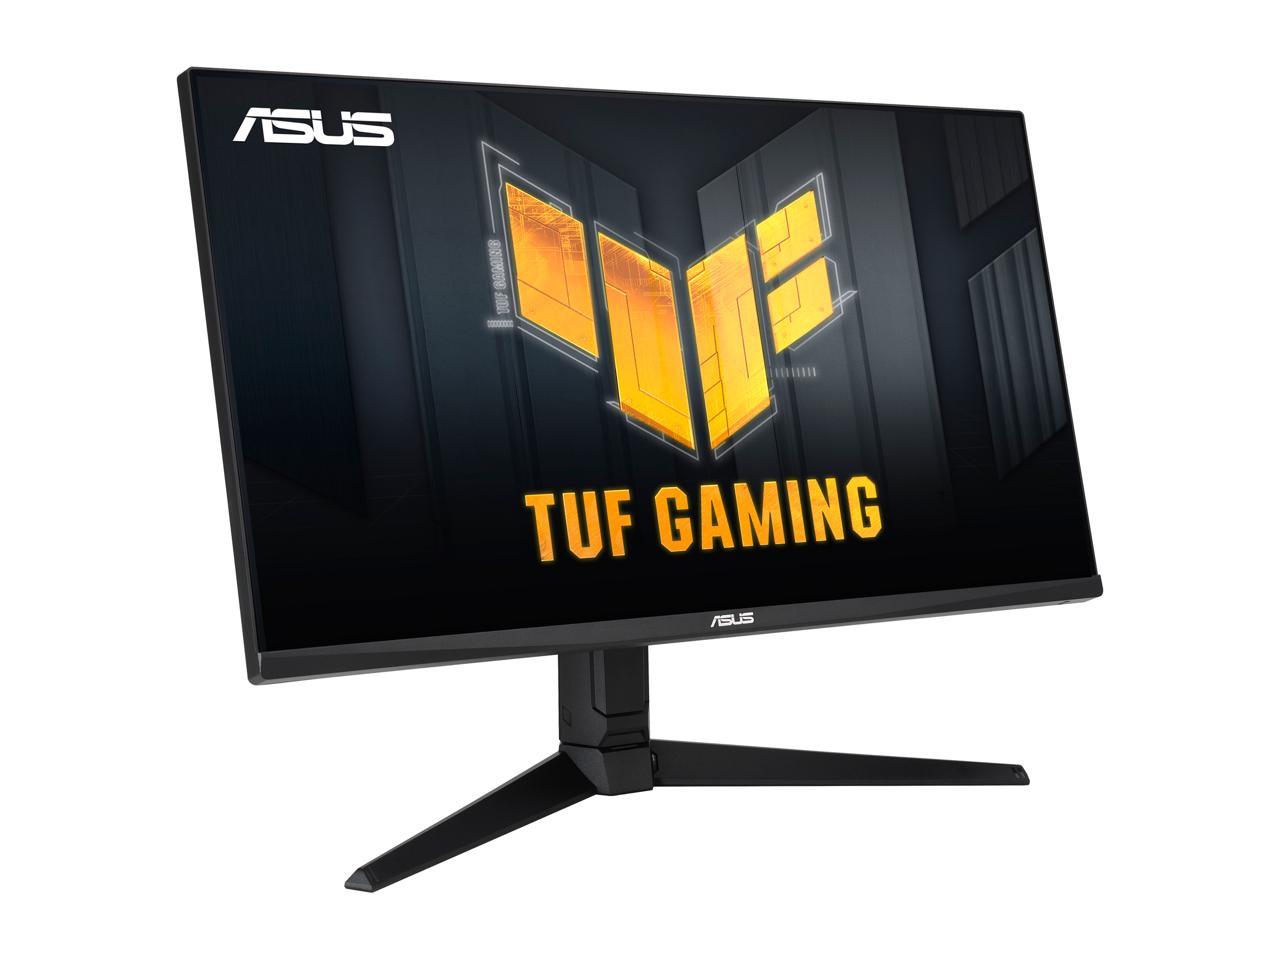 ASUS TUF Gaming 28" 4K 144Hz DSC HDMI 2.1 Gaming Monitor (VG28UQL1A) - UHD (3840 x 2160), Fast IPS, 1ms, Extreme Low Motion Blur Sync, G-SYNC Compatible, FreeSync Premium, Eye Care, DCI-P3 90%